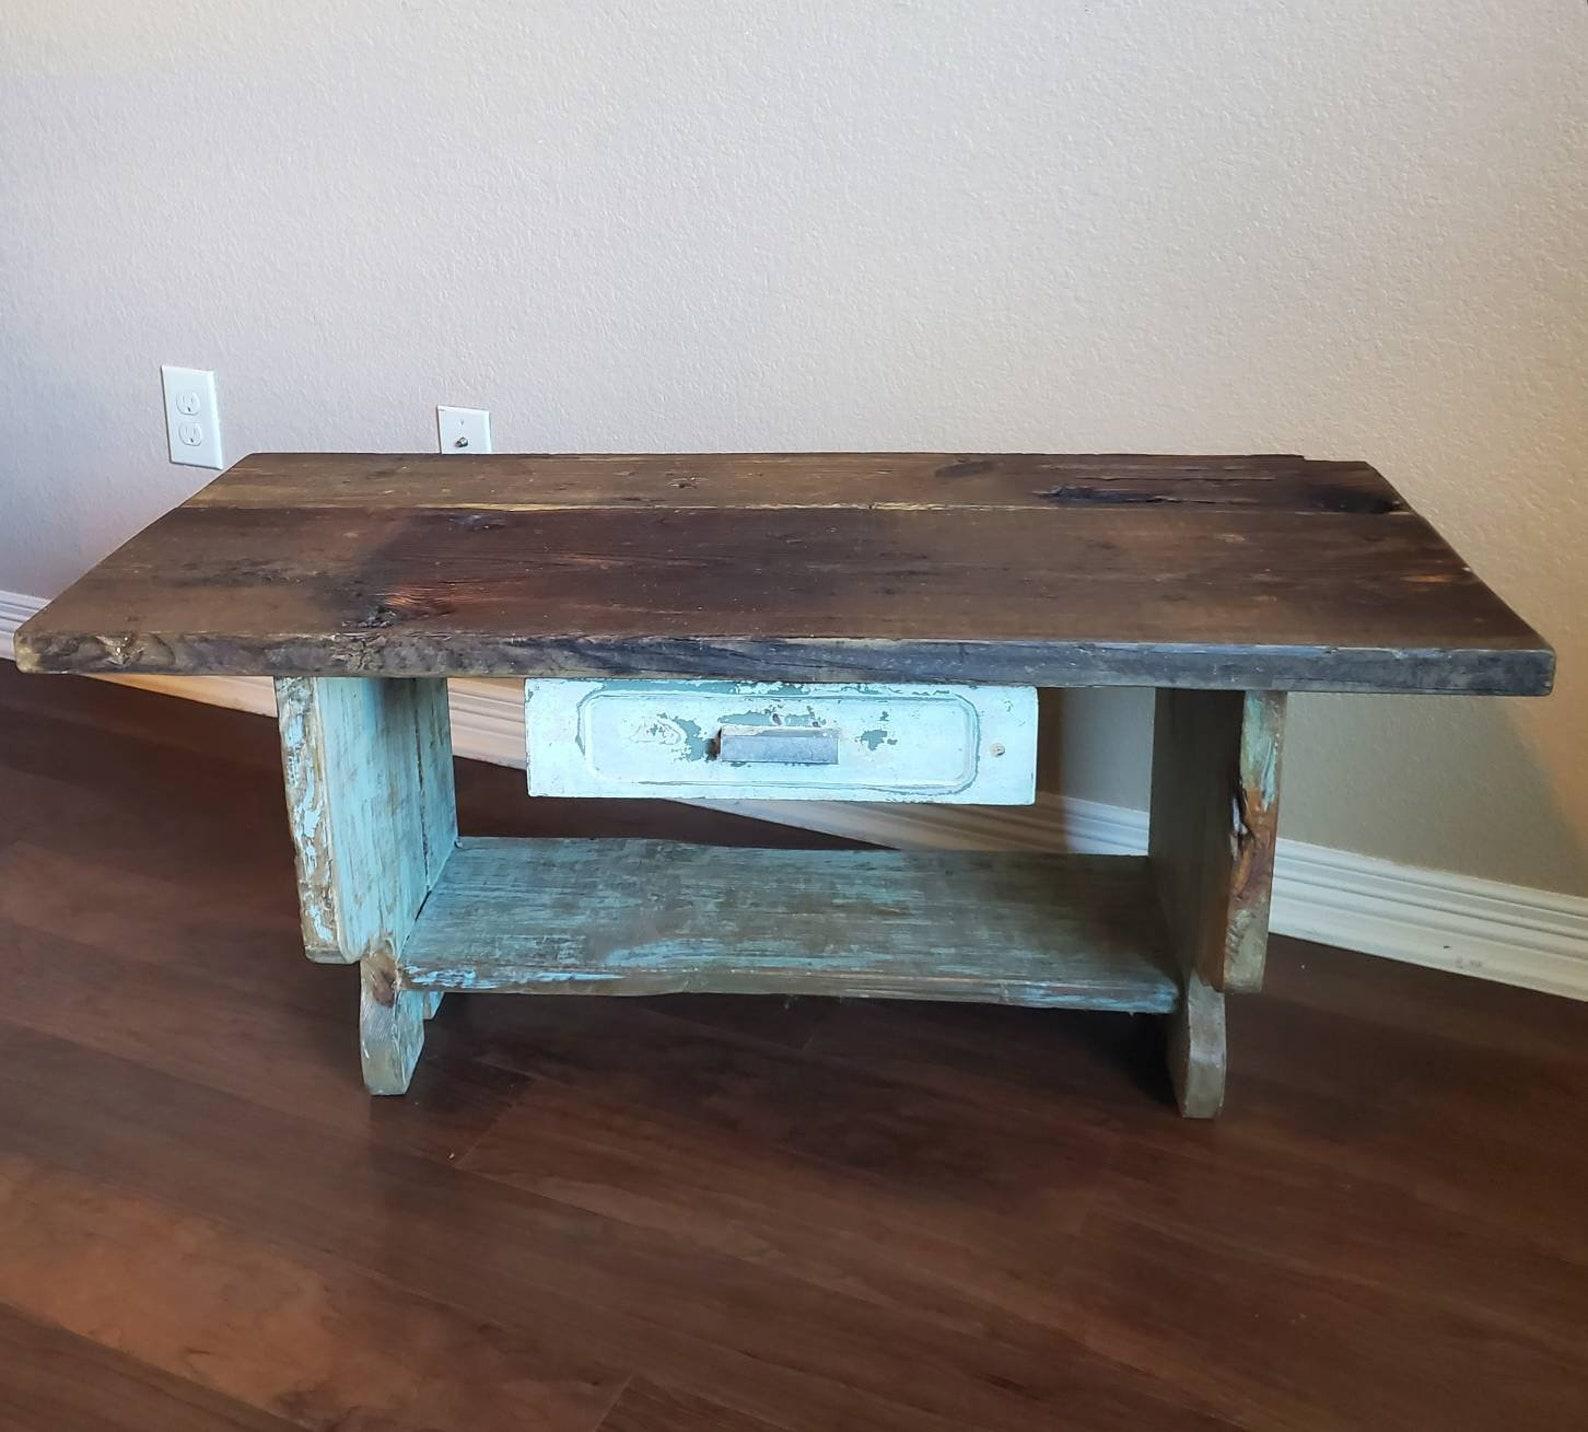 A most unusual farm house multi-use low table / bench / stool. Handmade in the Southwestern, United States, most likely on a Texas farm or ranch, possibly New Mexico or Arizona. 

A wonderful example of turn of the late 19th / early 20th century